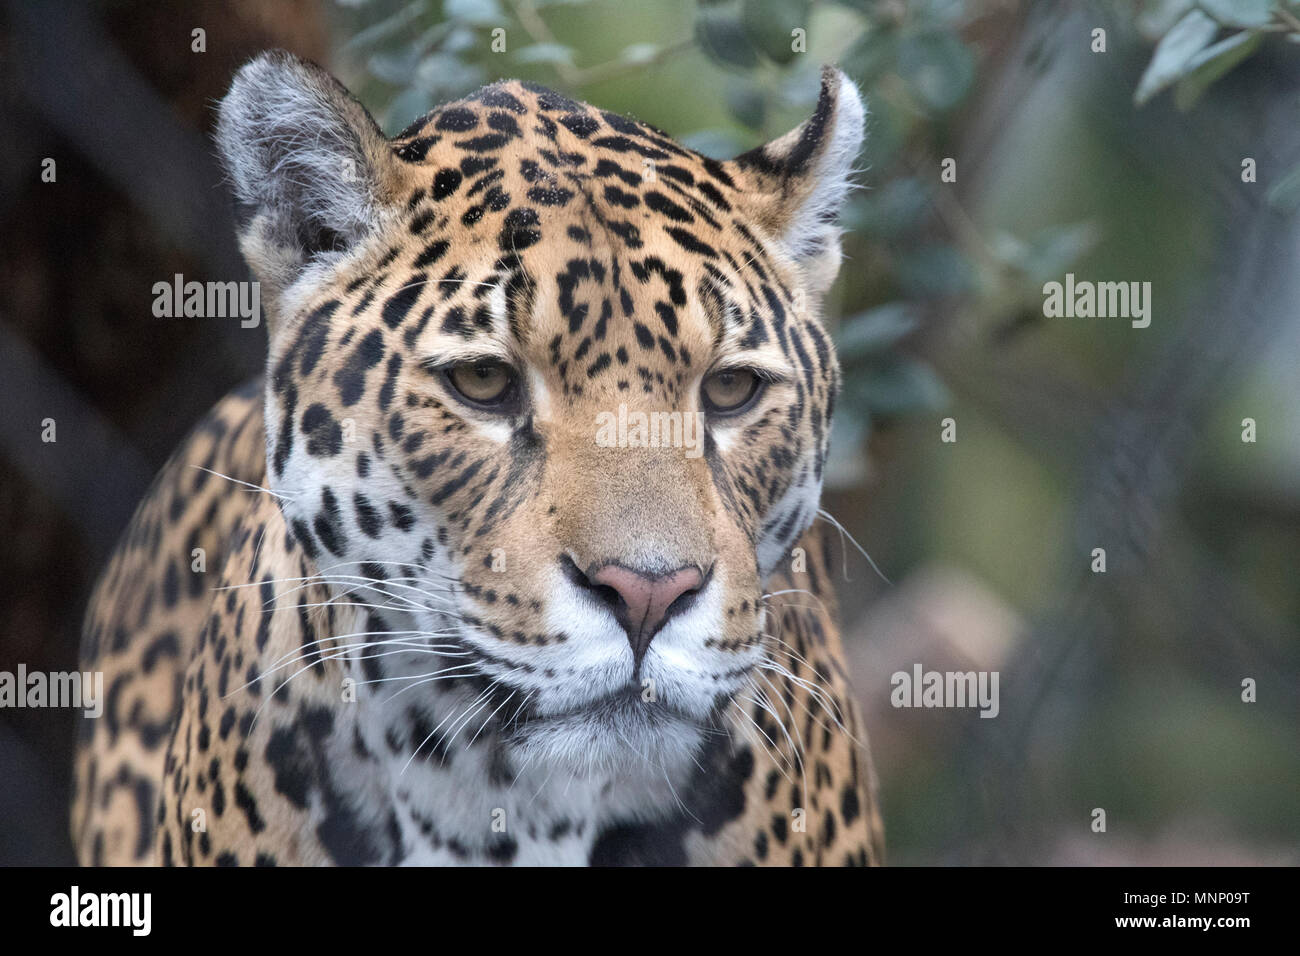 Headshot of a jaguar predator with beautiful camouflage colors ...